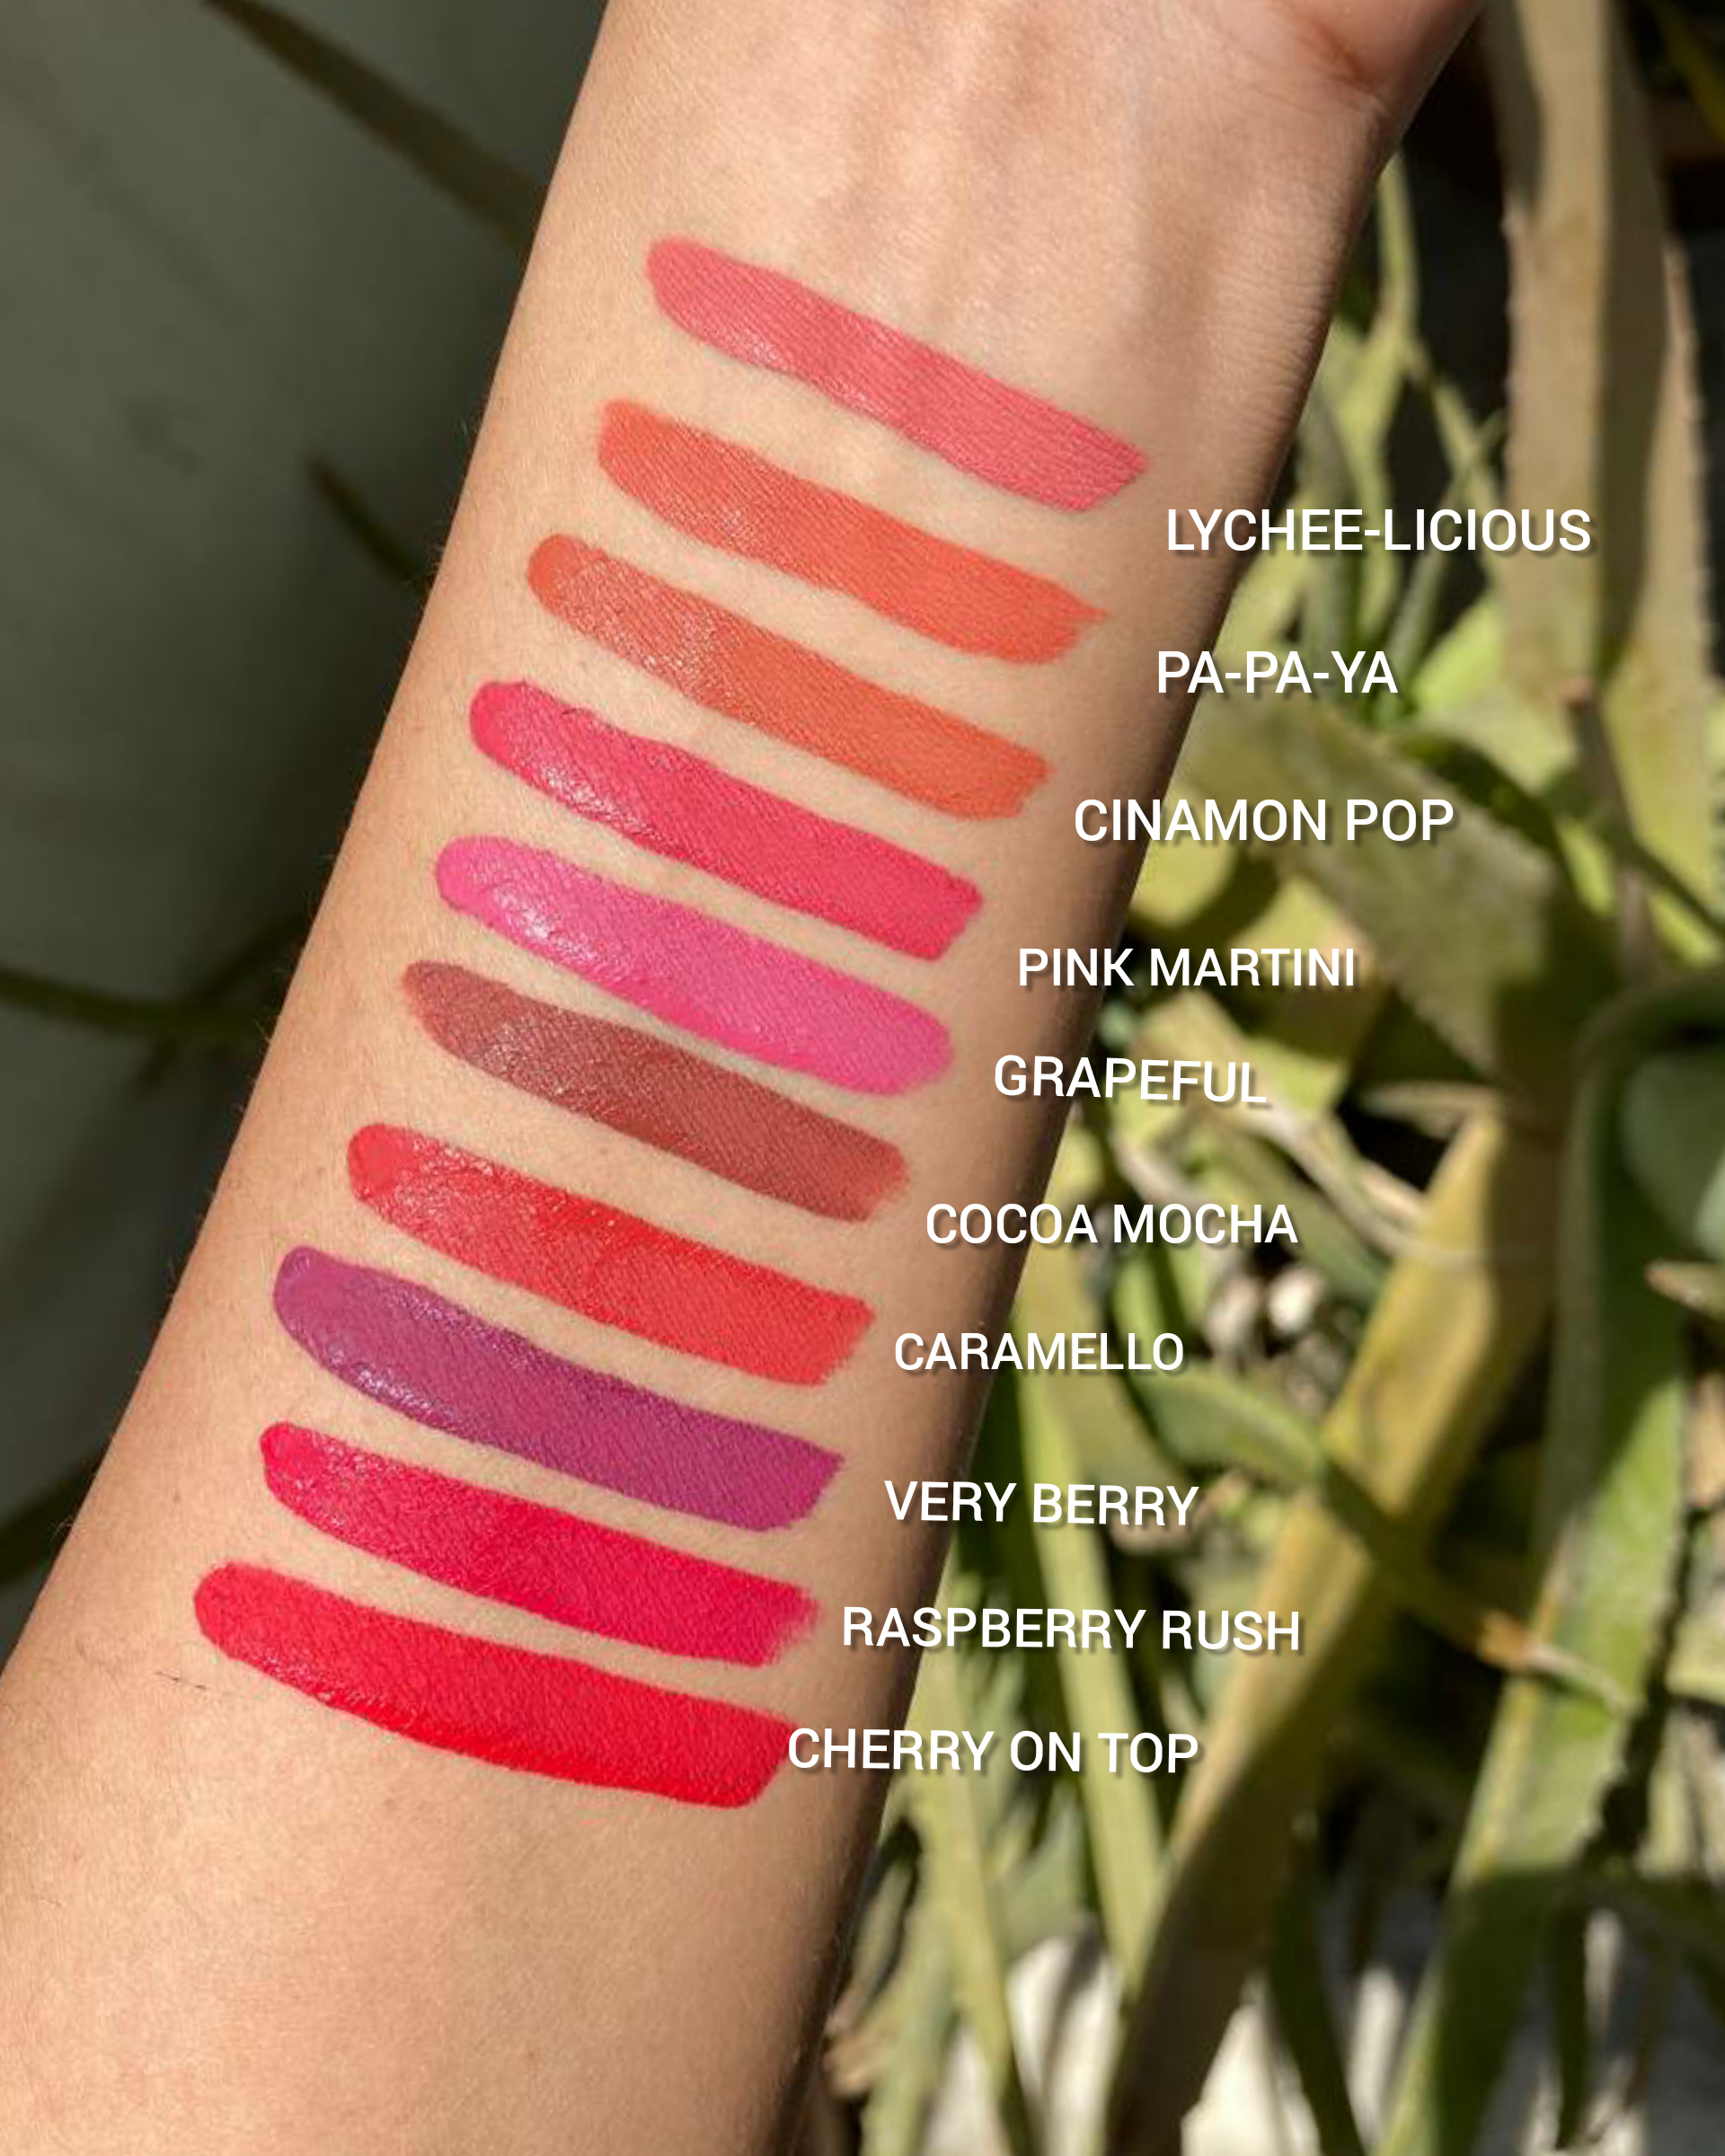 Thoughts on Plum Matte in Heaven liquid lipsticks, are they worth it?